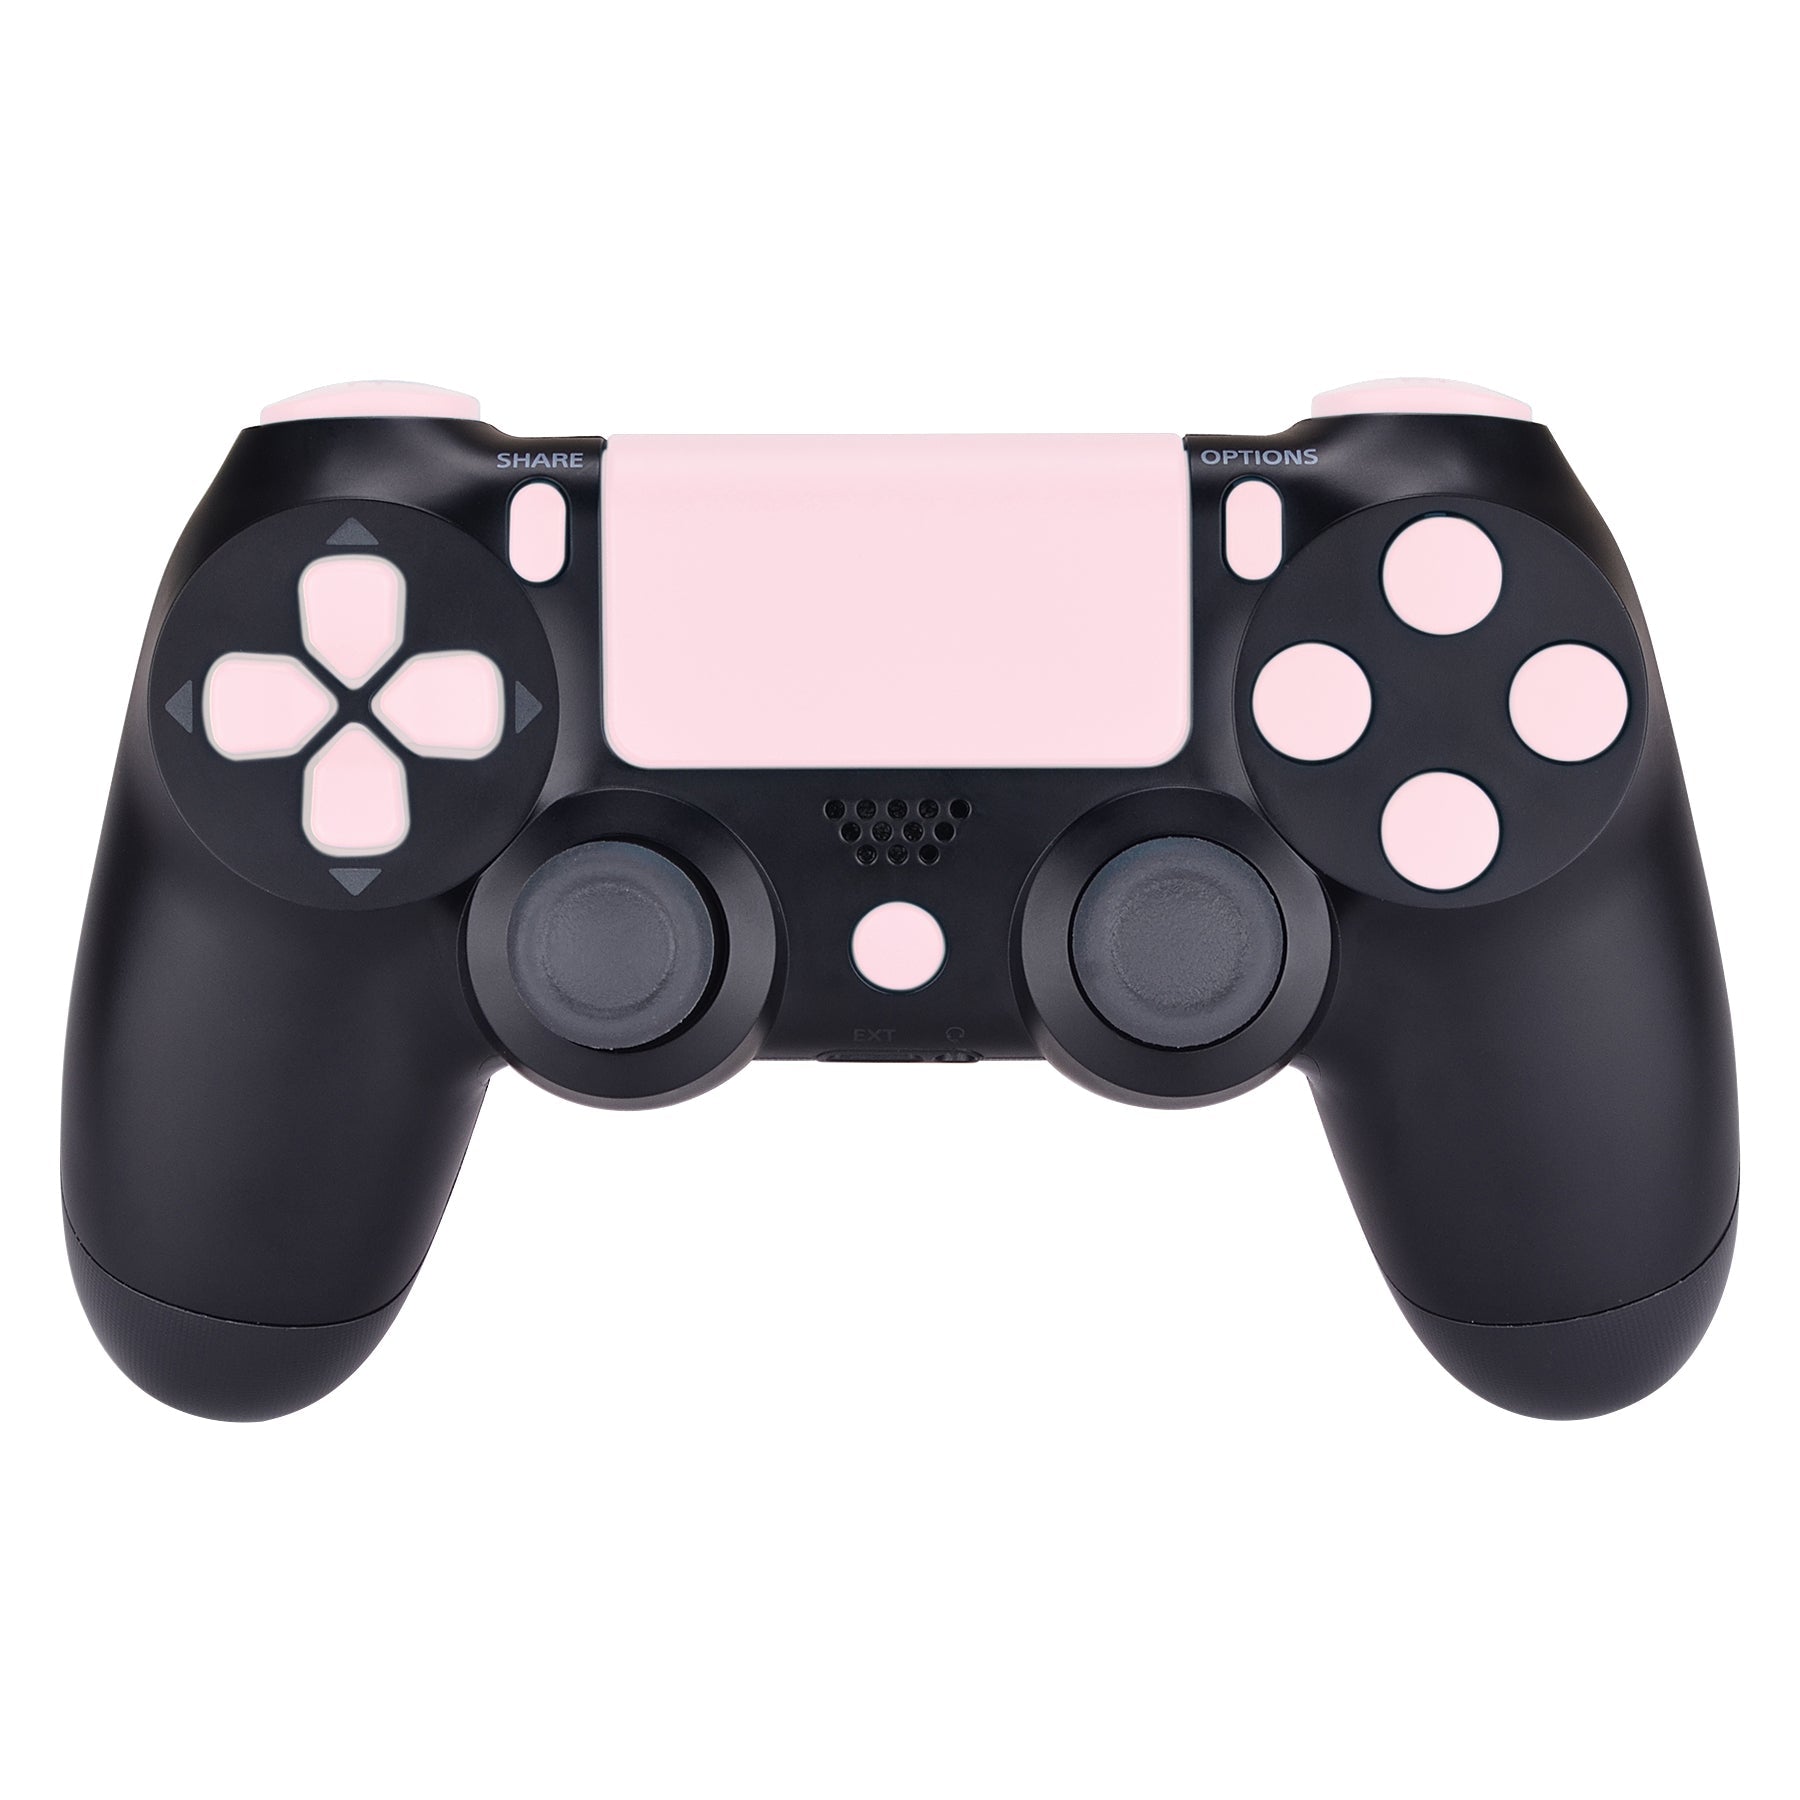 ps4 eXtremeRate ps4 Share R2 L1 Kit Pink for Controller L2 Options Cherry D-pad Slim Home – Replacement Touchpad Buttons for Triggers Full Buttons eXtremeRate Pro Repair Blossoms Set Controller, Action R1